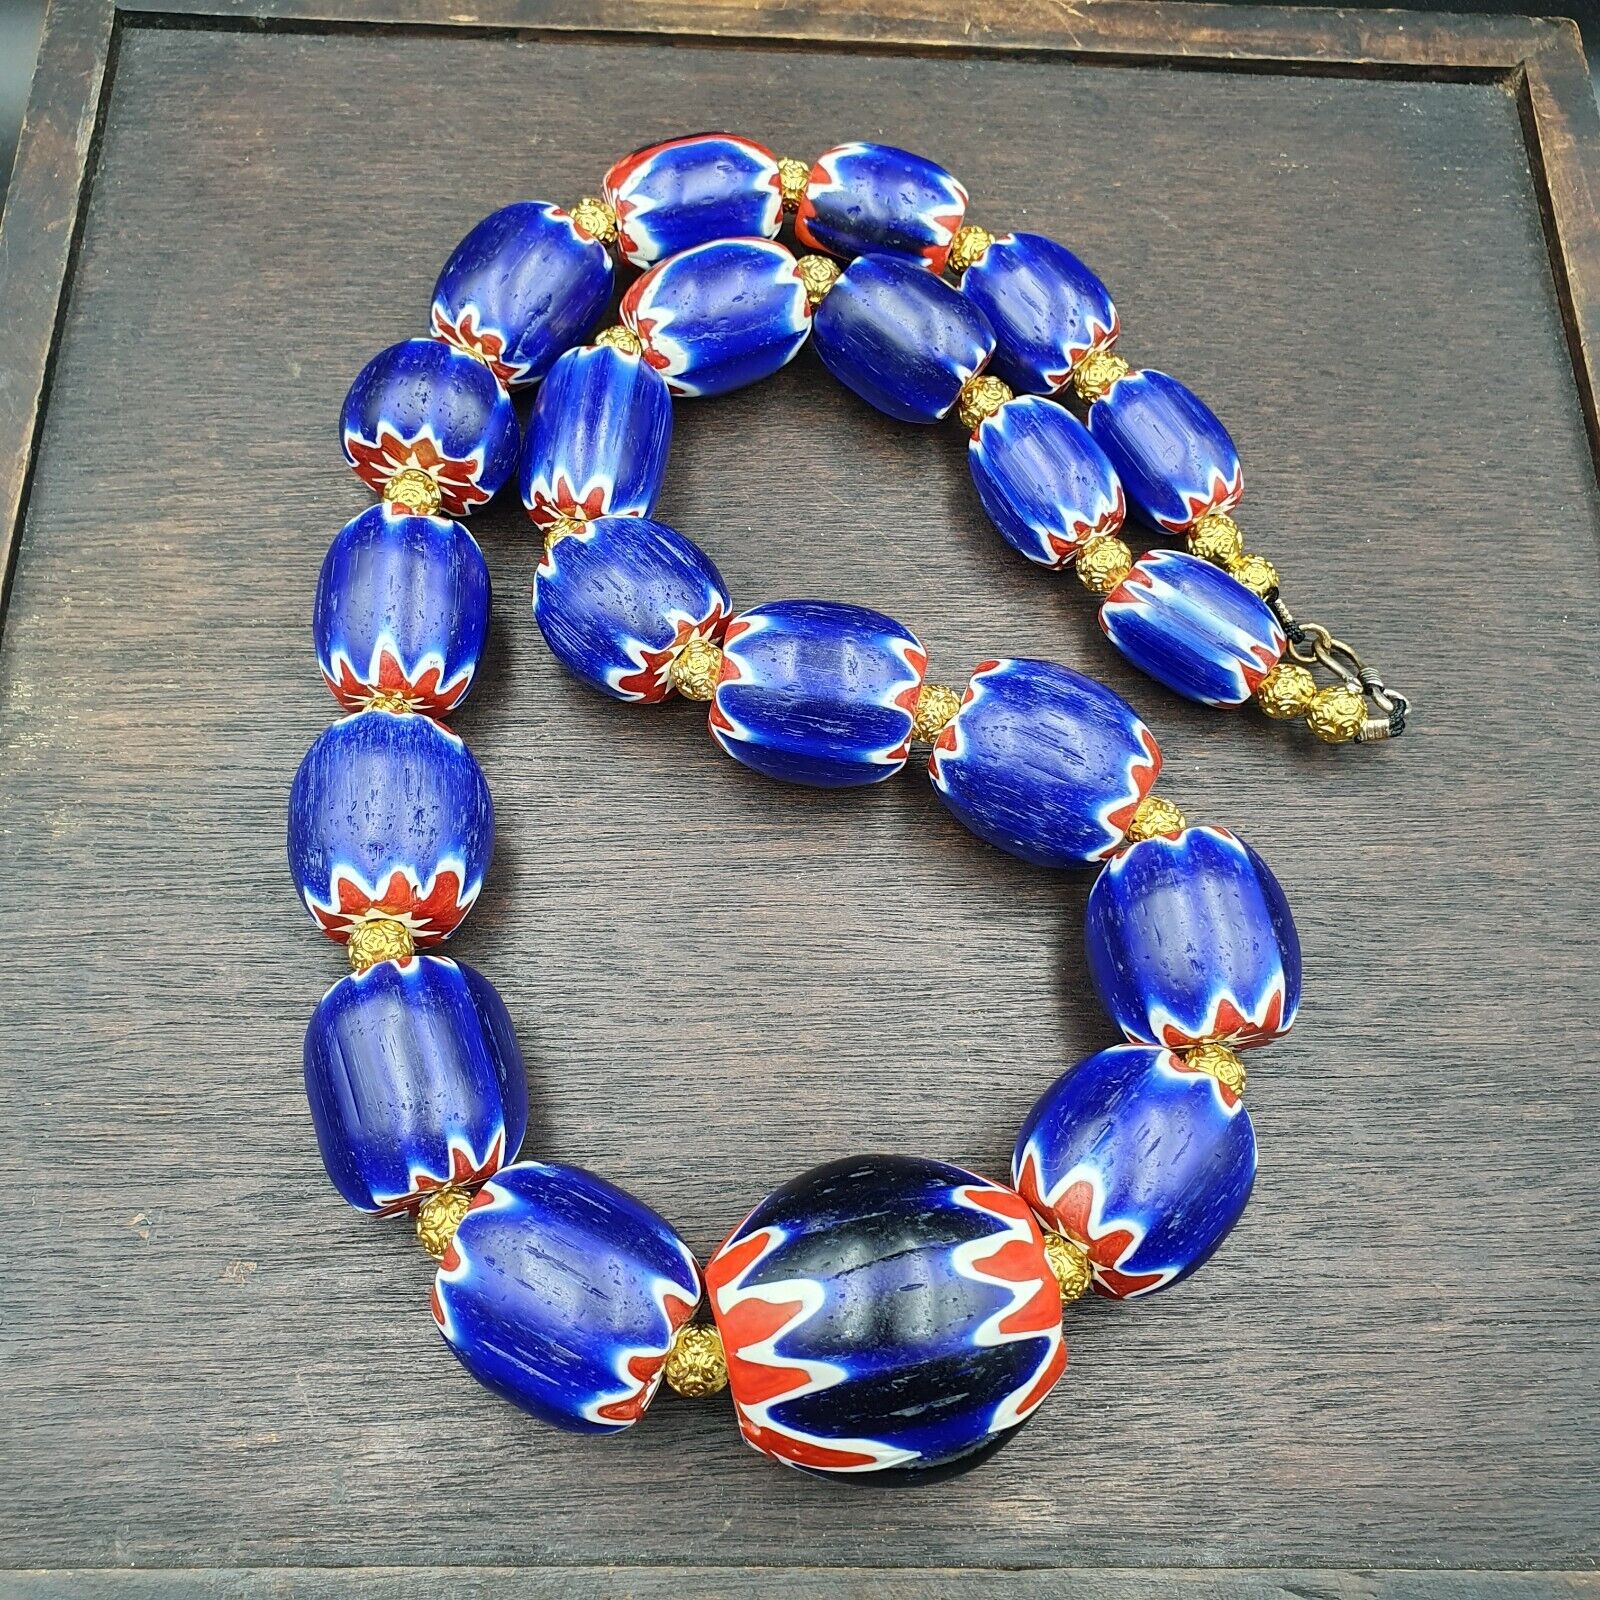 600g Vintage Old Blue Chevron Venetian Style Trade beads 40mm Beads Necklace